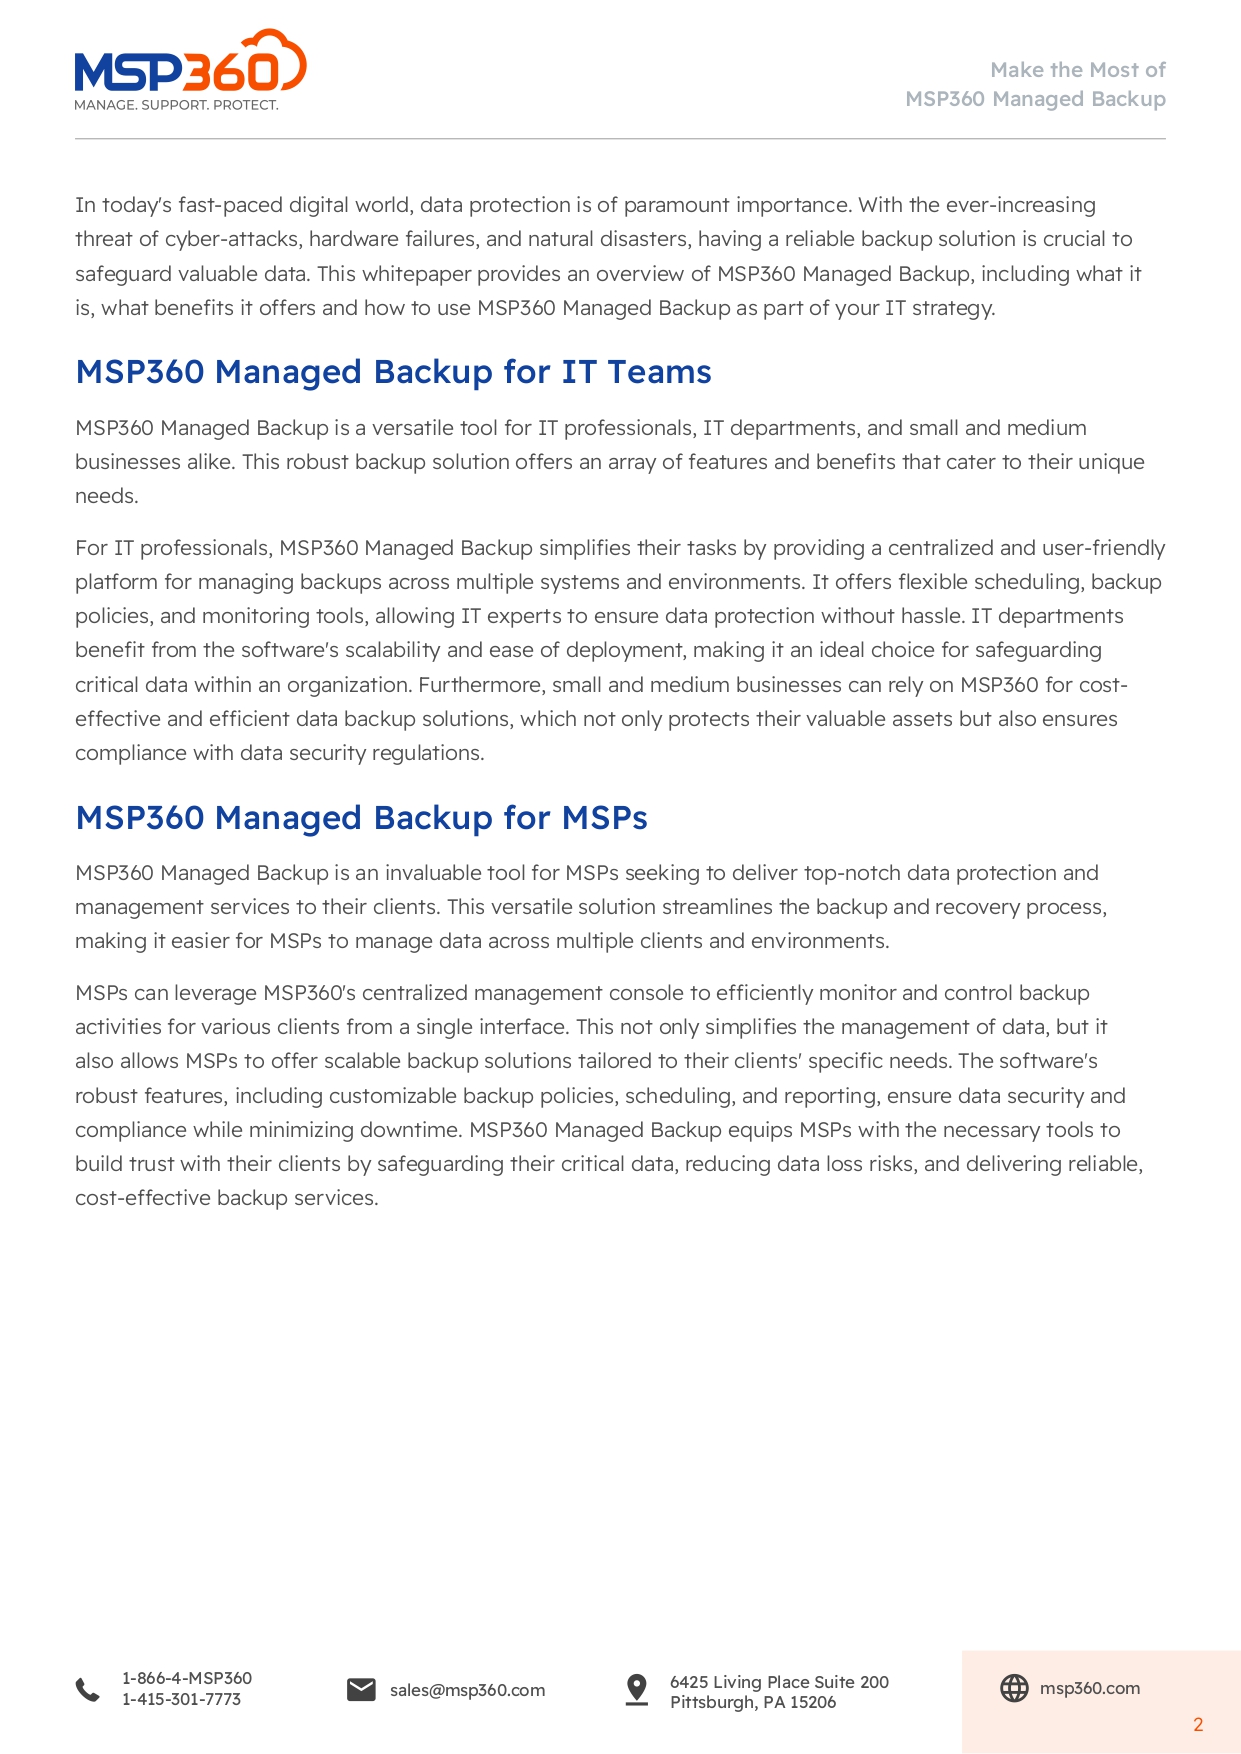 Make the Most of MSP360 Managed Backup_page-0002